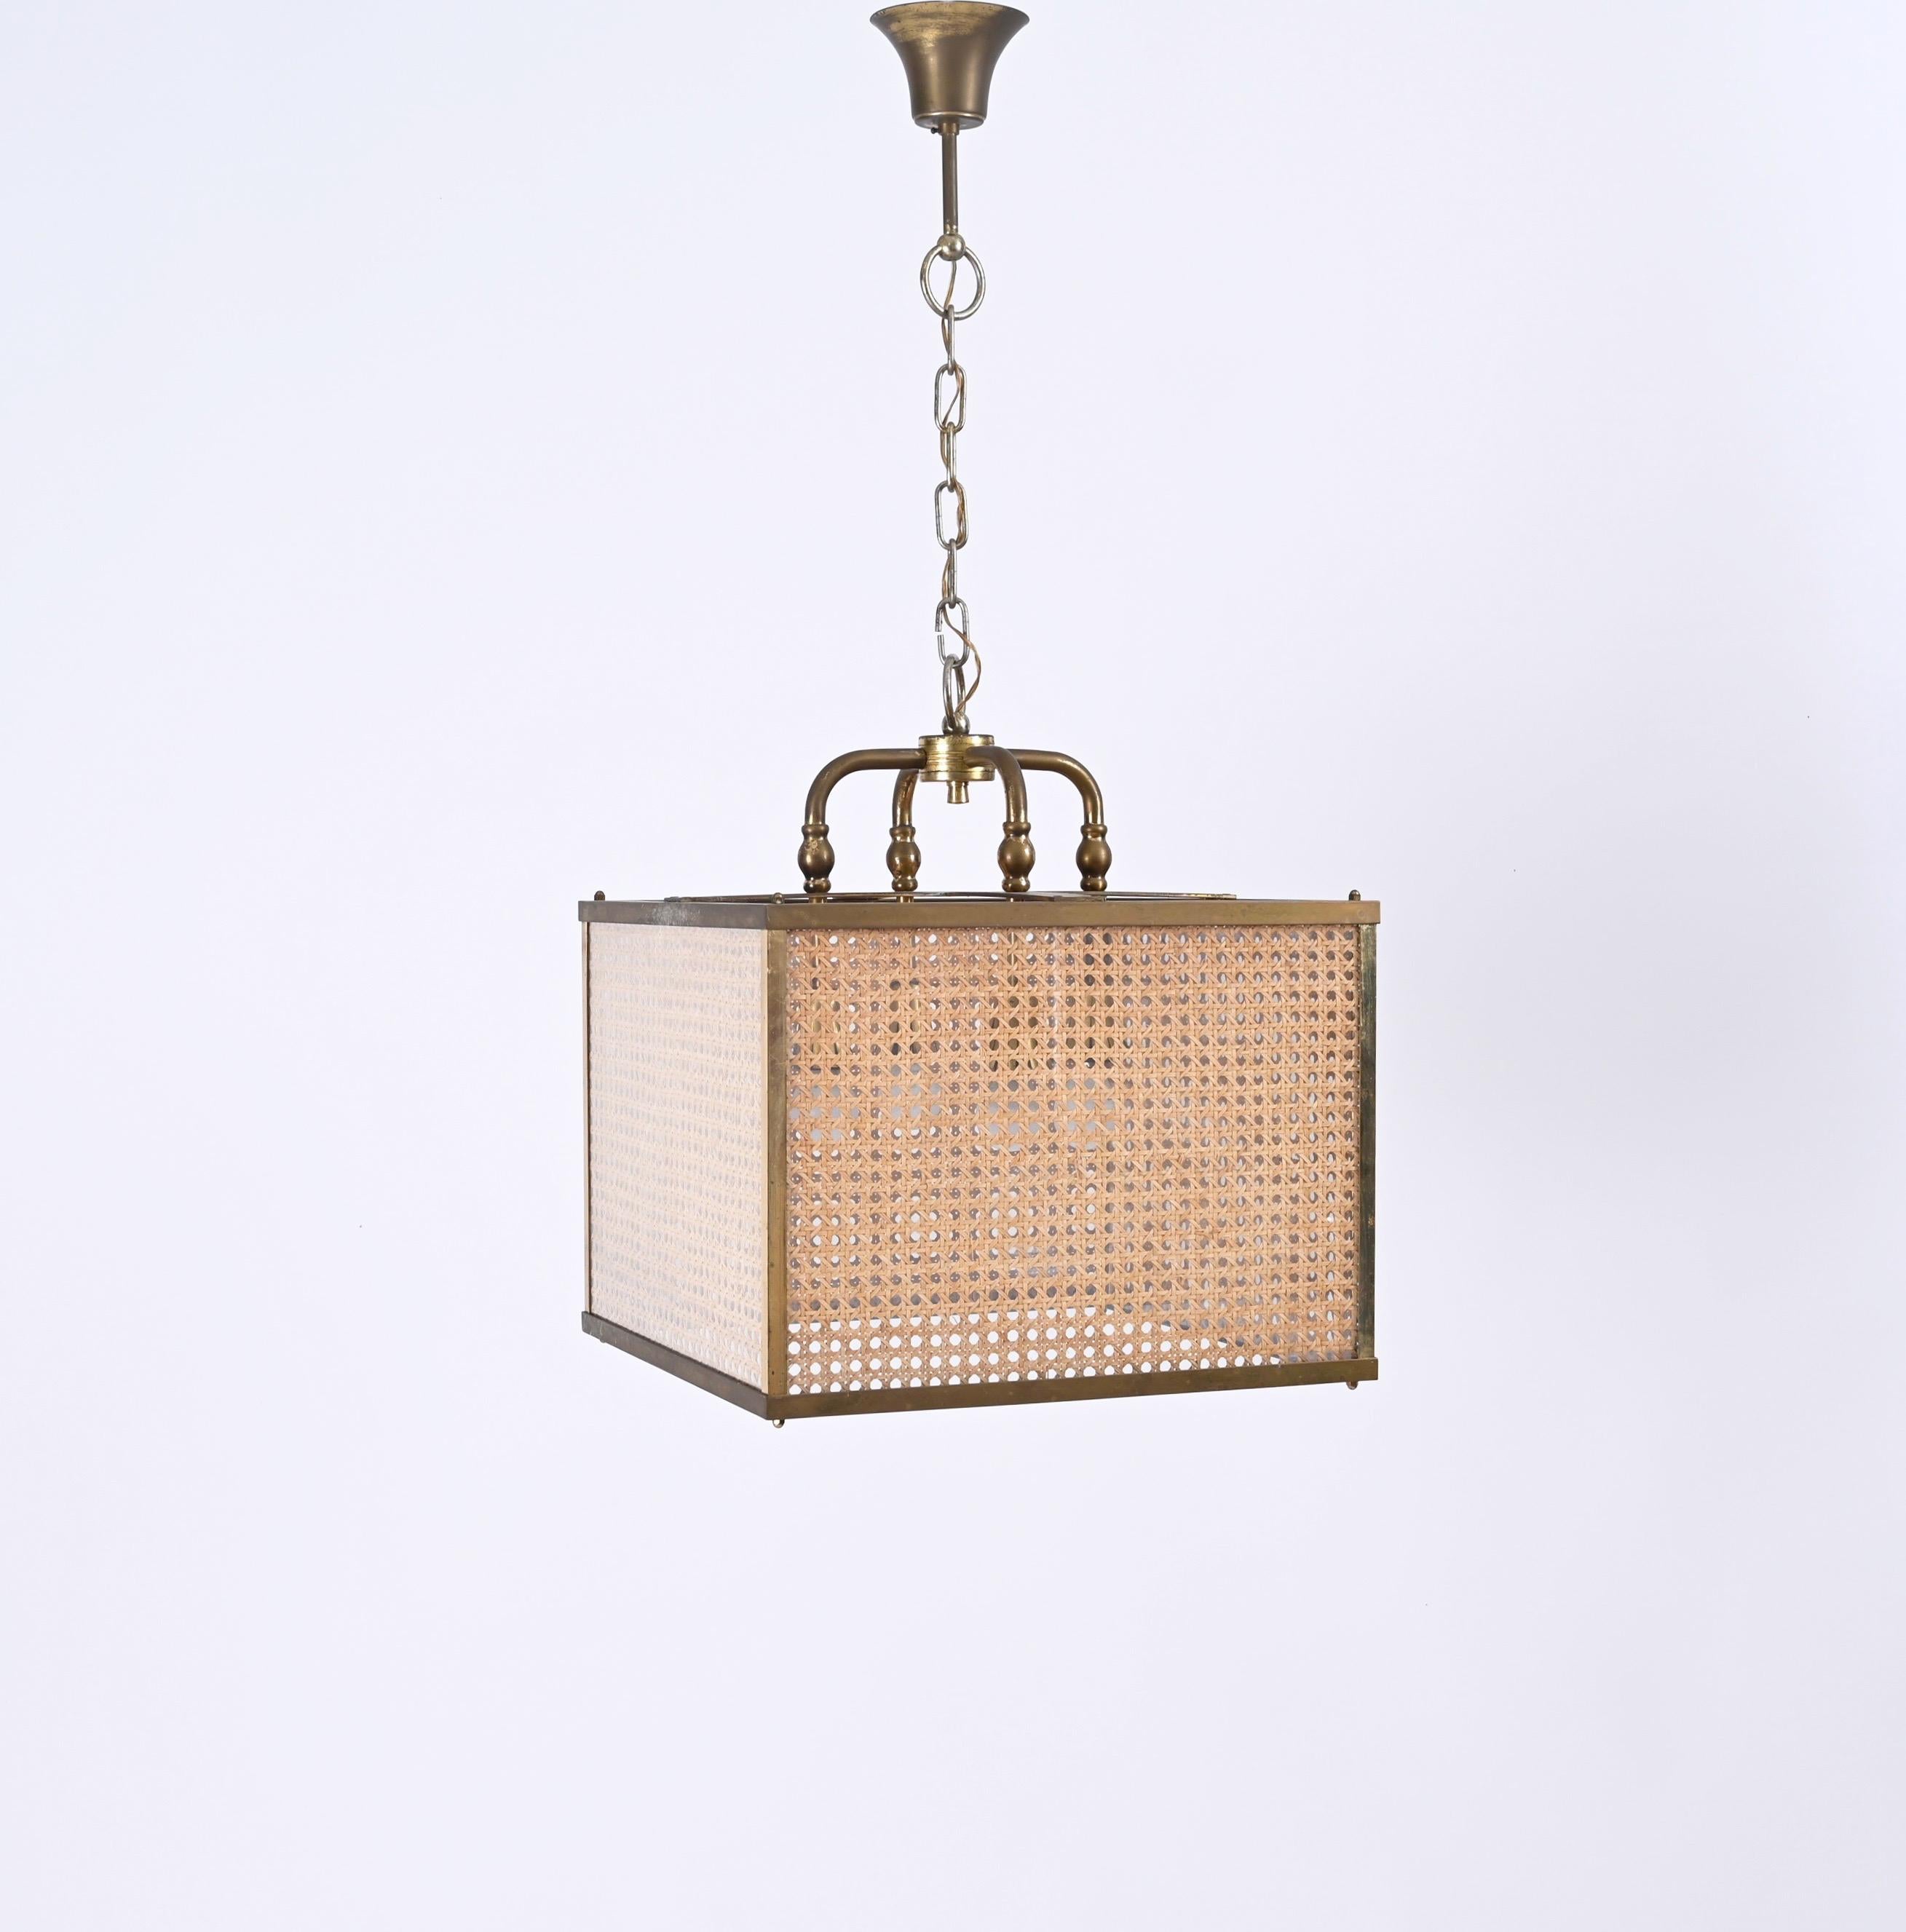 Brass, Vienna Straw Wicker and Glass Square Chandelier Lamp, Italy, 1950s For Sale 8